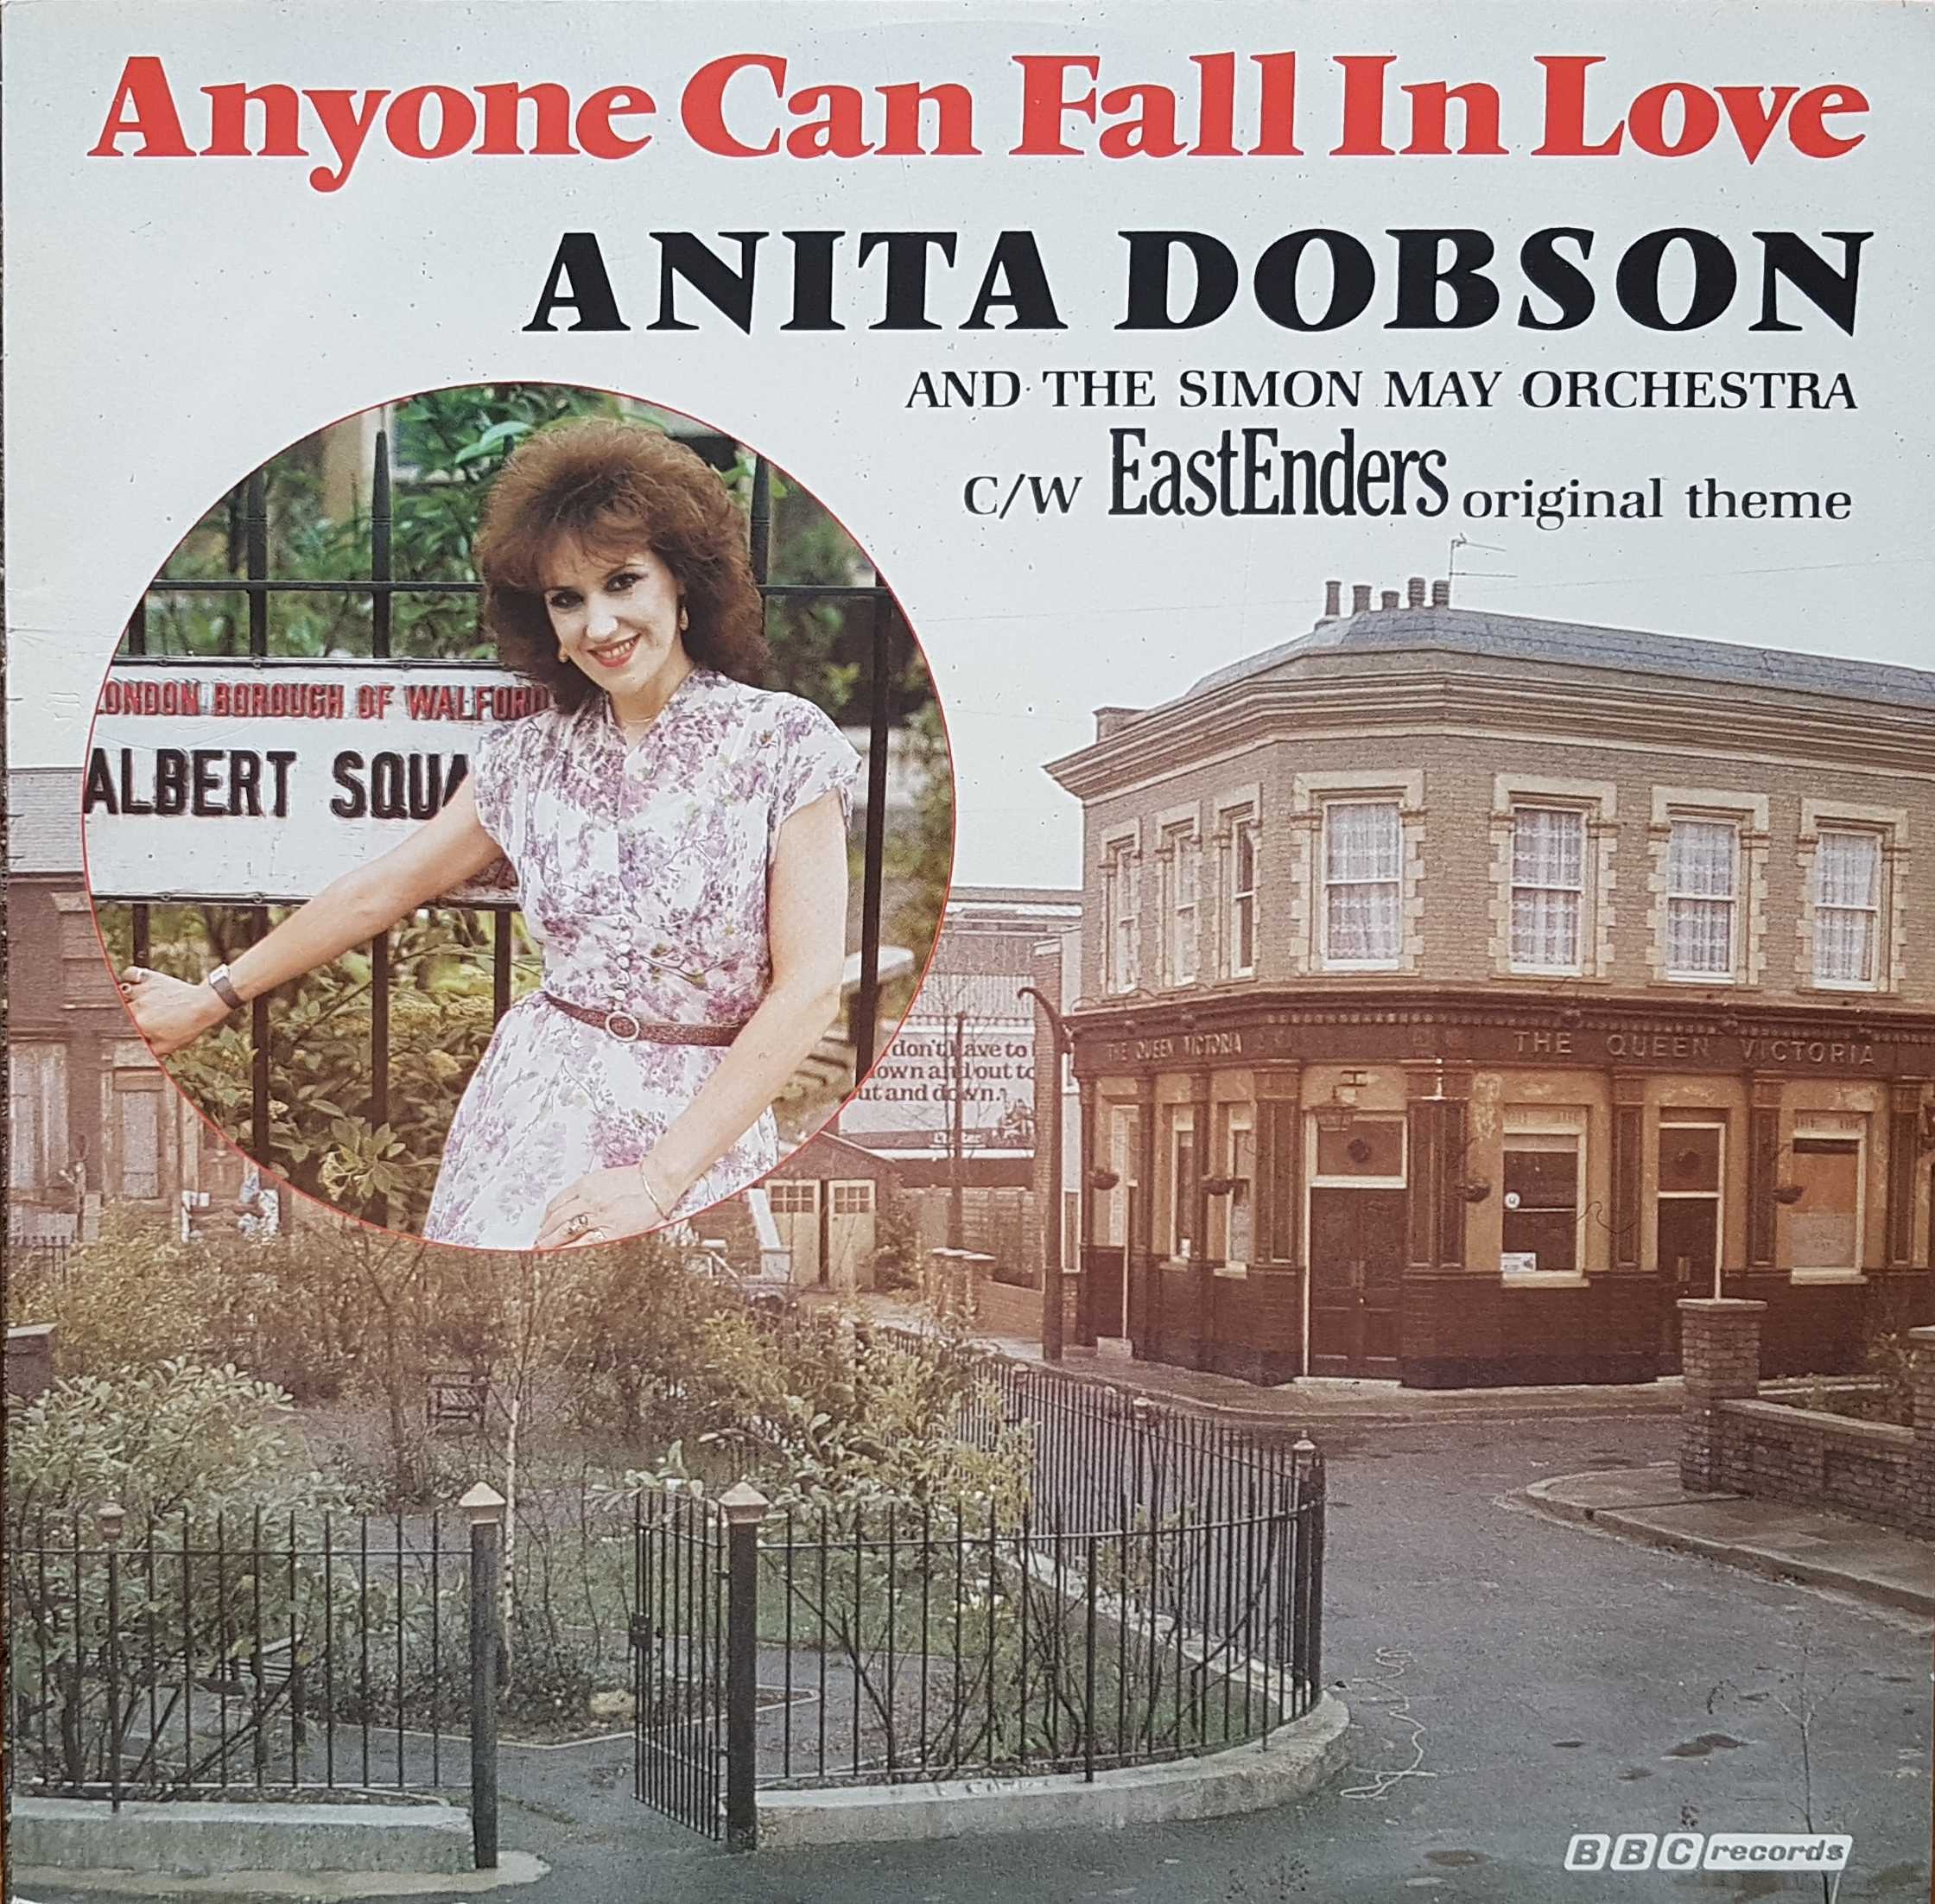 Picture of 12 RSL 191 Anyone can fall in love (EastEnders) by artist Simon May / Leslie Osborne / Don Black / Anita Dobson from the BBC 12inches - Records and Tapes library